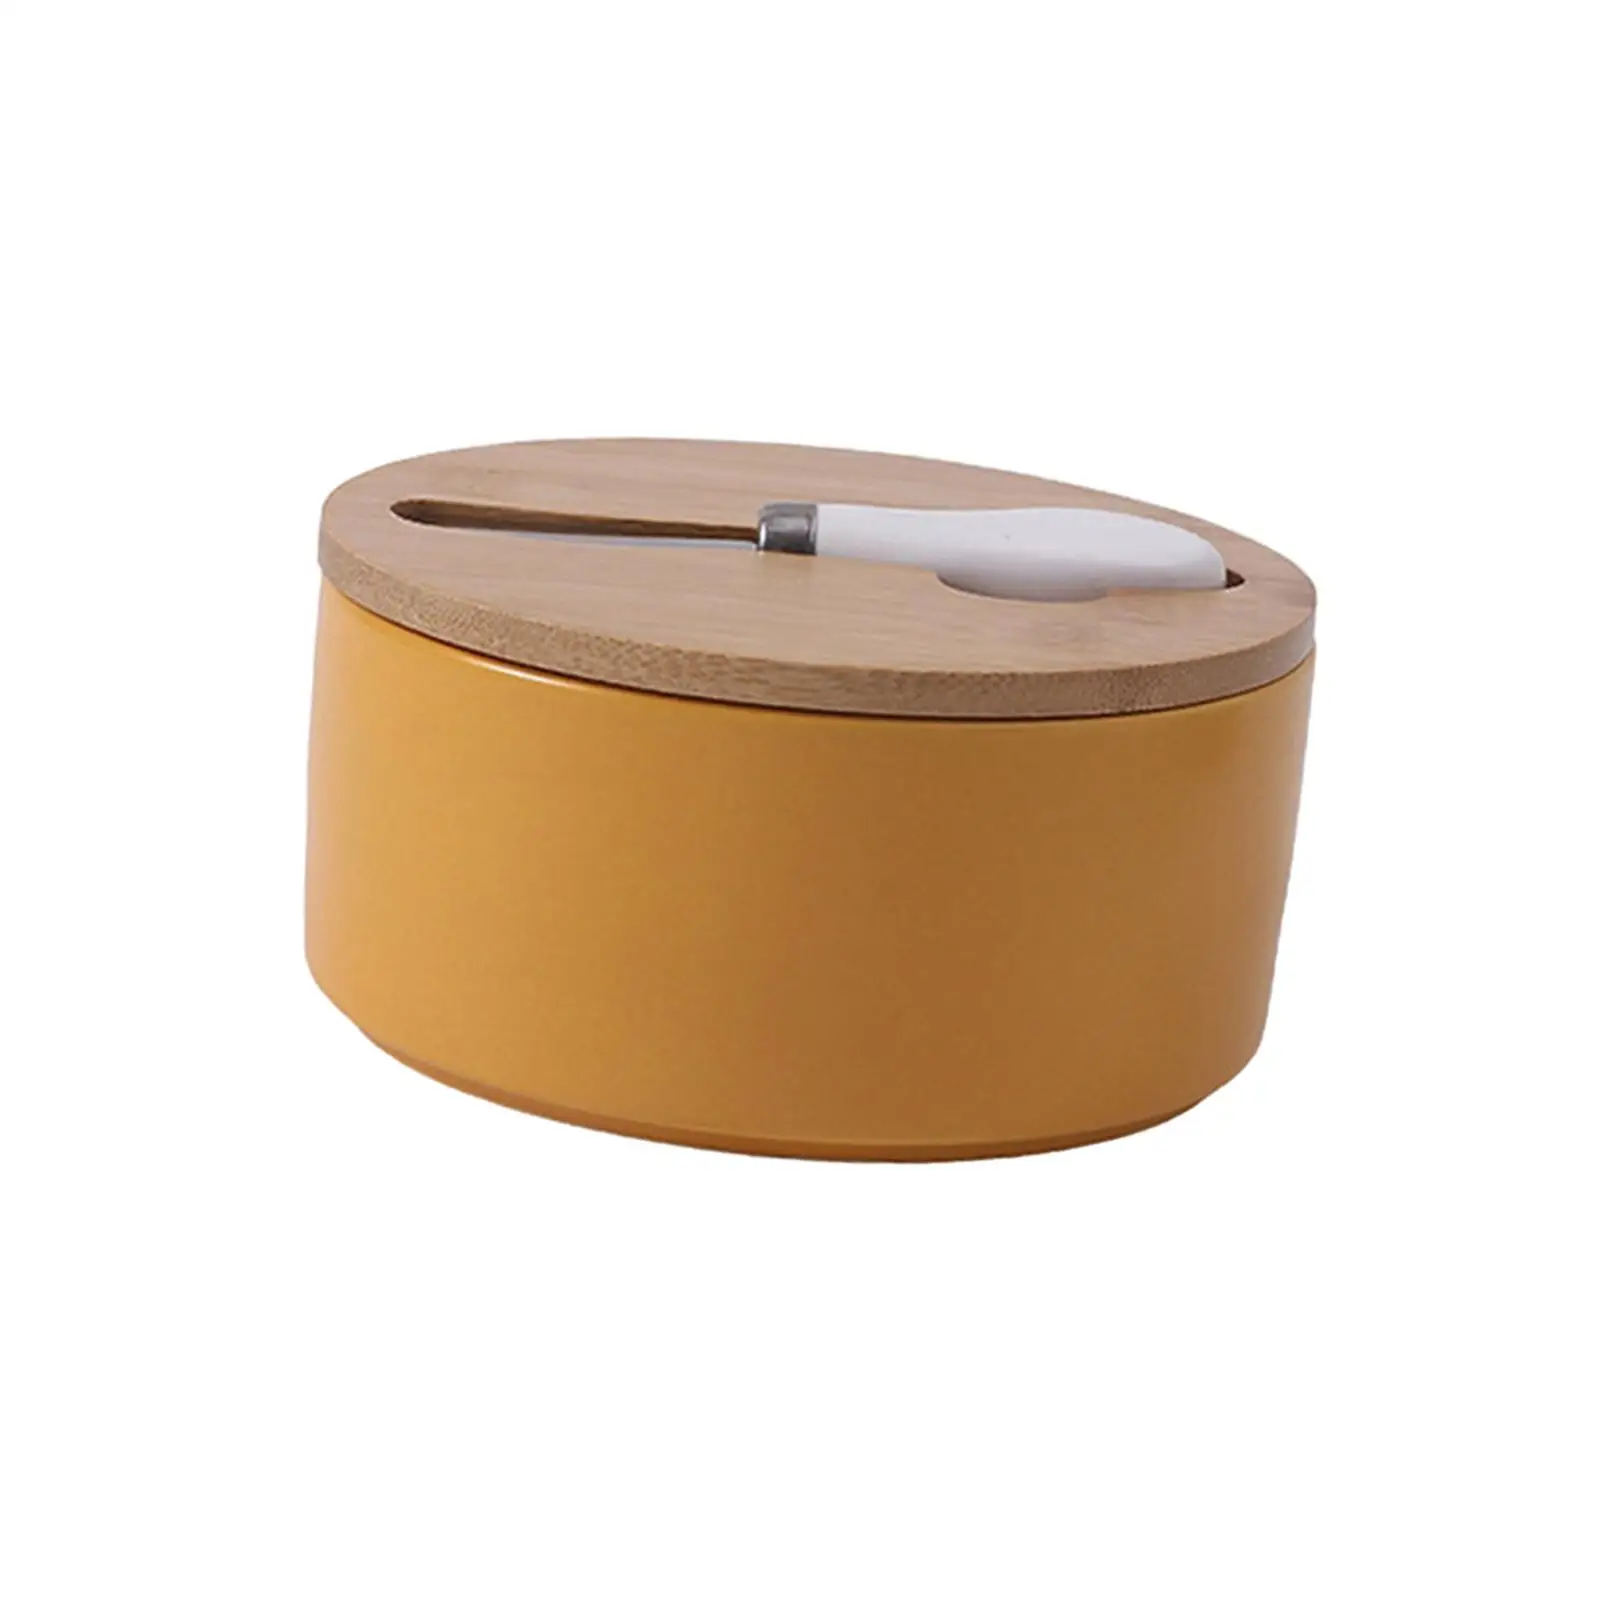 Butter Saver Container Box with Lid Airtight Butter Keeper Round Ceramic Butter Dish for All Types of Butter Refrigerator